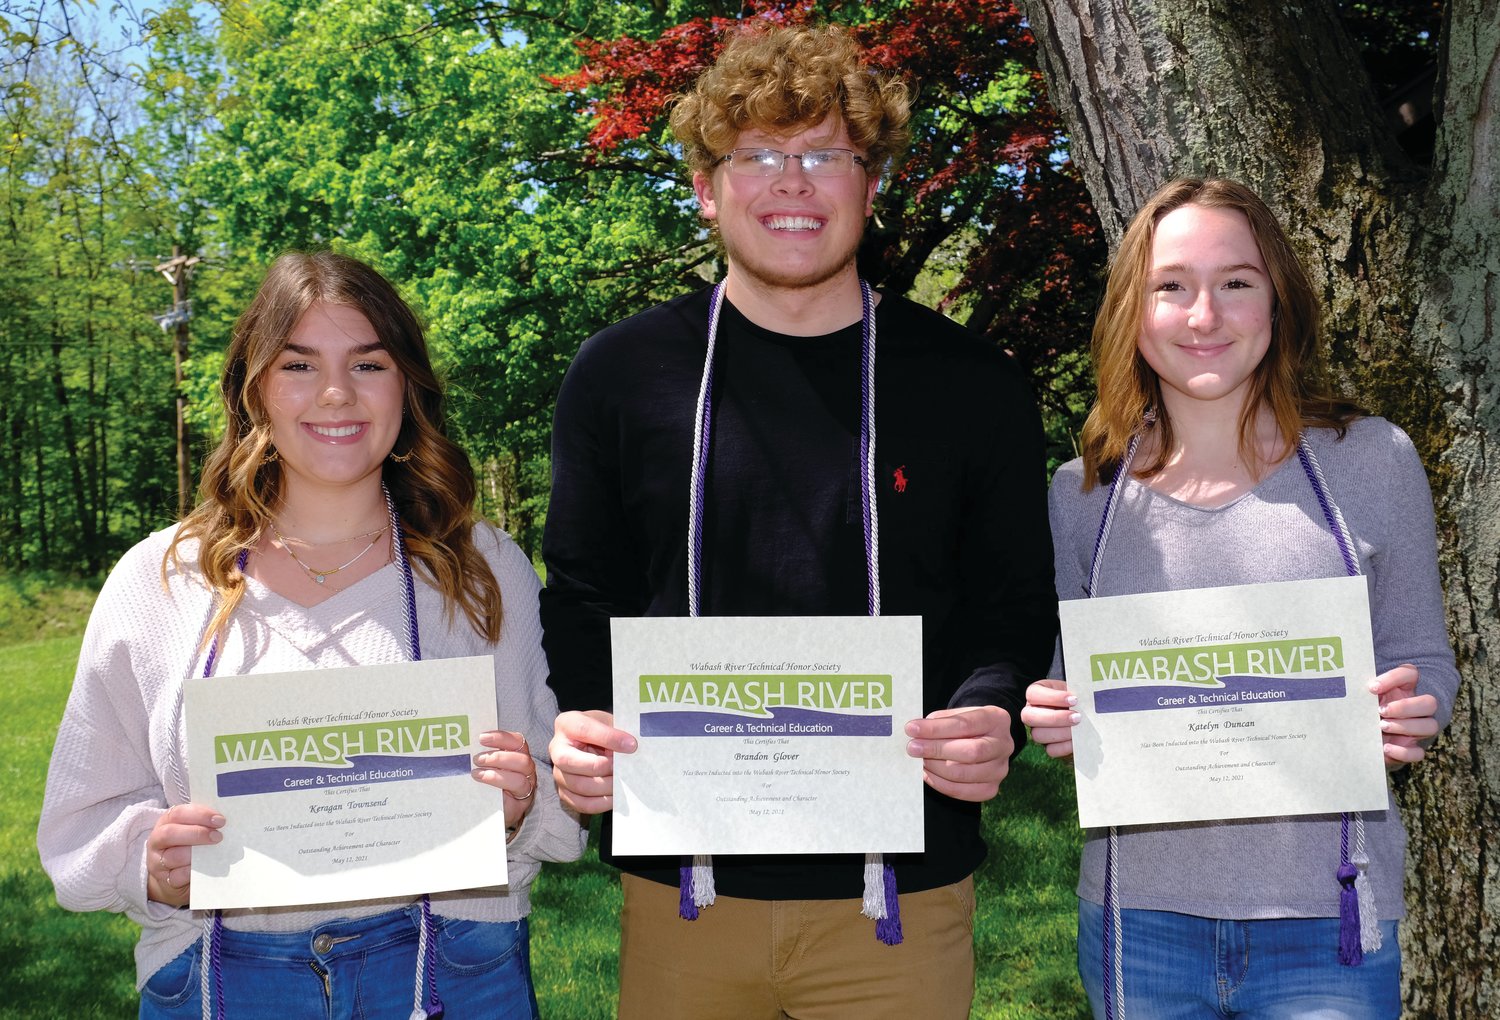 Covington students recently inducted into the Wabash River Technical Honor Society are (L to R) Keragan Townsend, Brandon Glover and Katelyn Duncan.